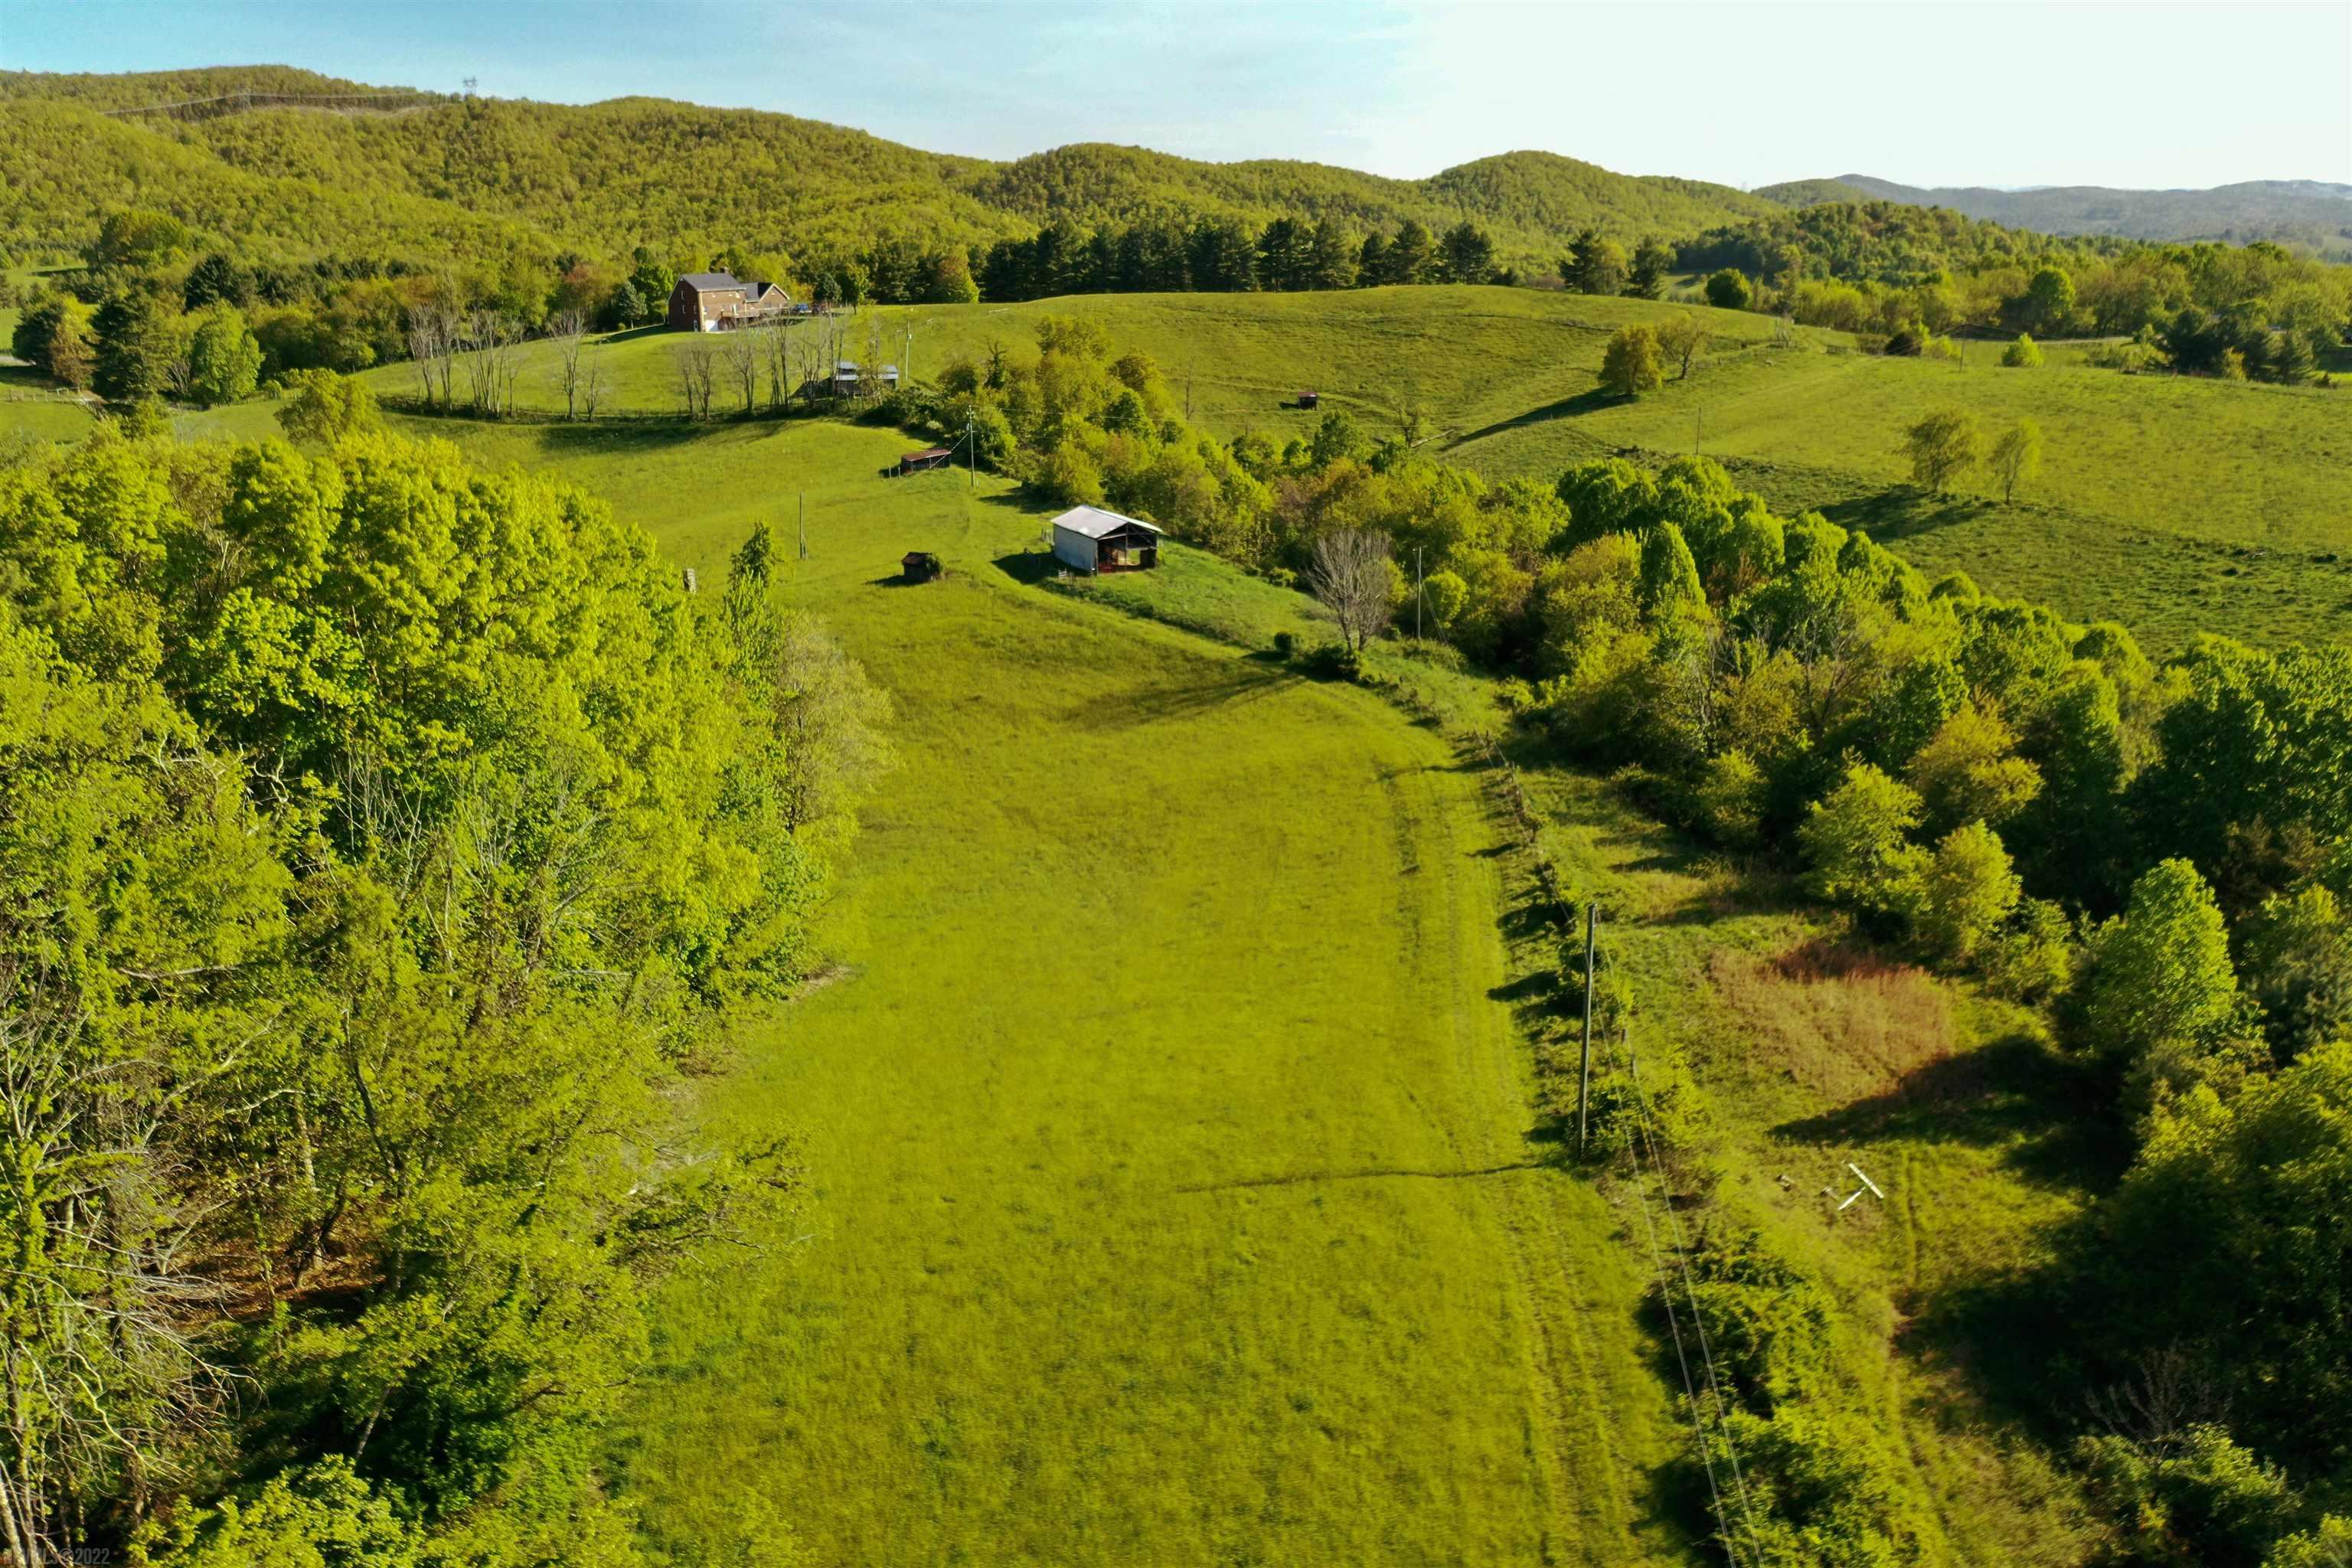 Beautiful rolling hills with long-range, south-facing view at existing home site with septic in place.  A barn and out buildings make this a nice horse or livestock property.  The mixture of pasture, woods and level land provides plenty of optionality for the land owner.  The spring has previously provided water for the home site and the barn.  High Speed Fiber Optic internet service available.  Enjoy the peace and quite of the rural lifestyle with the convenience of working from home. Additional 13 adjoining acres available MLS #413844.